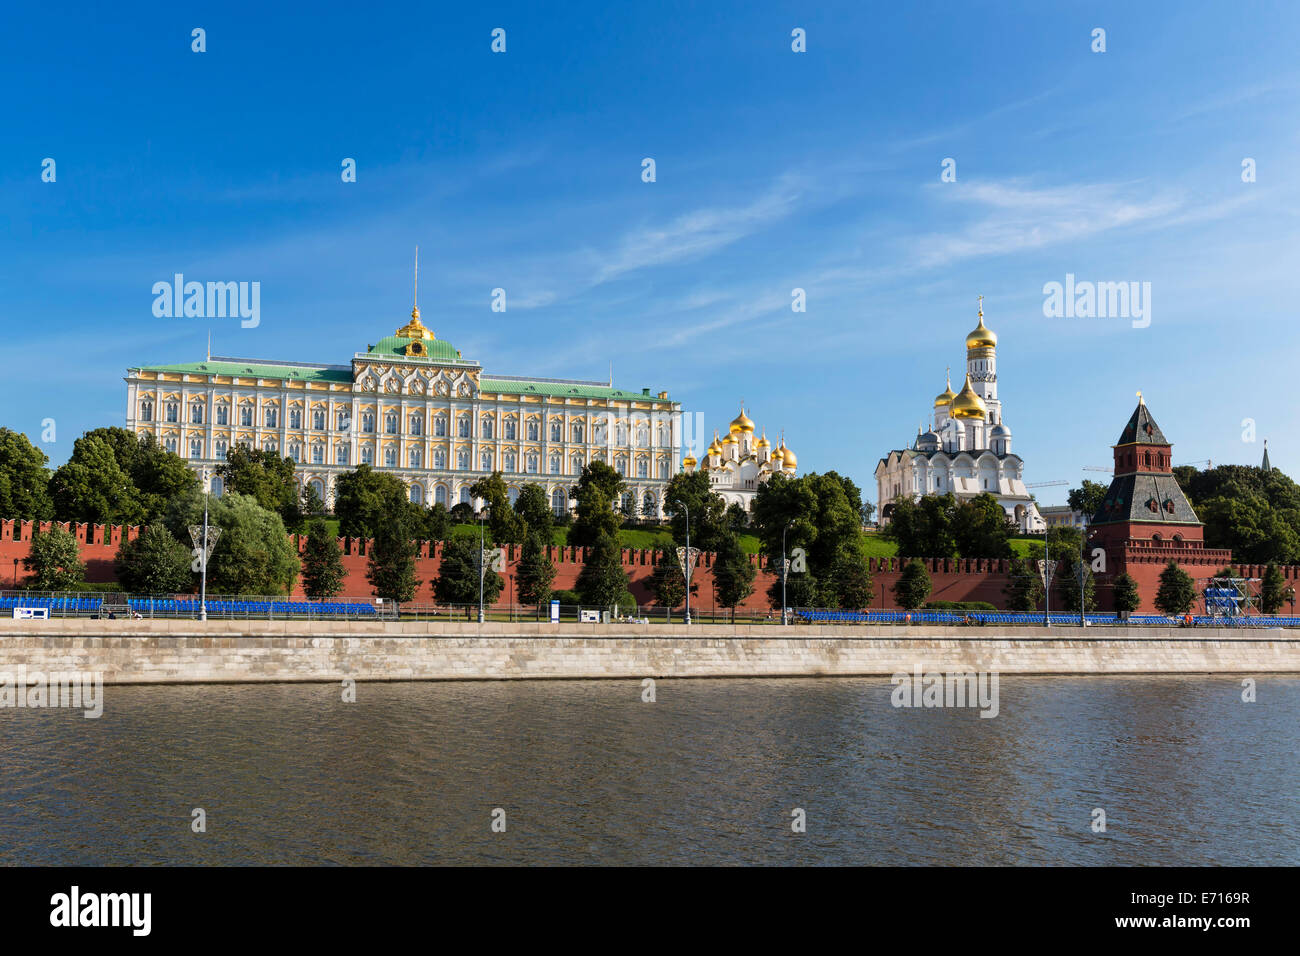 Russia, Moscow, River Moskva, Grand Kremlin Palace and cathedrals Stock Photo